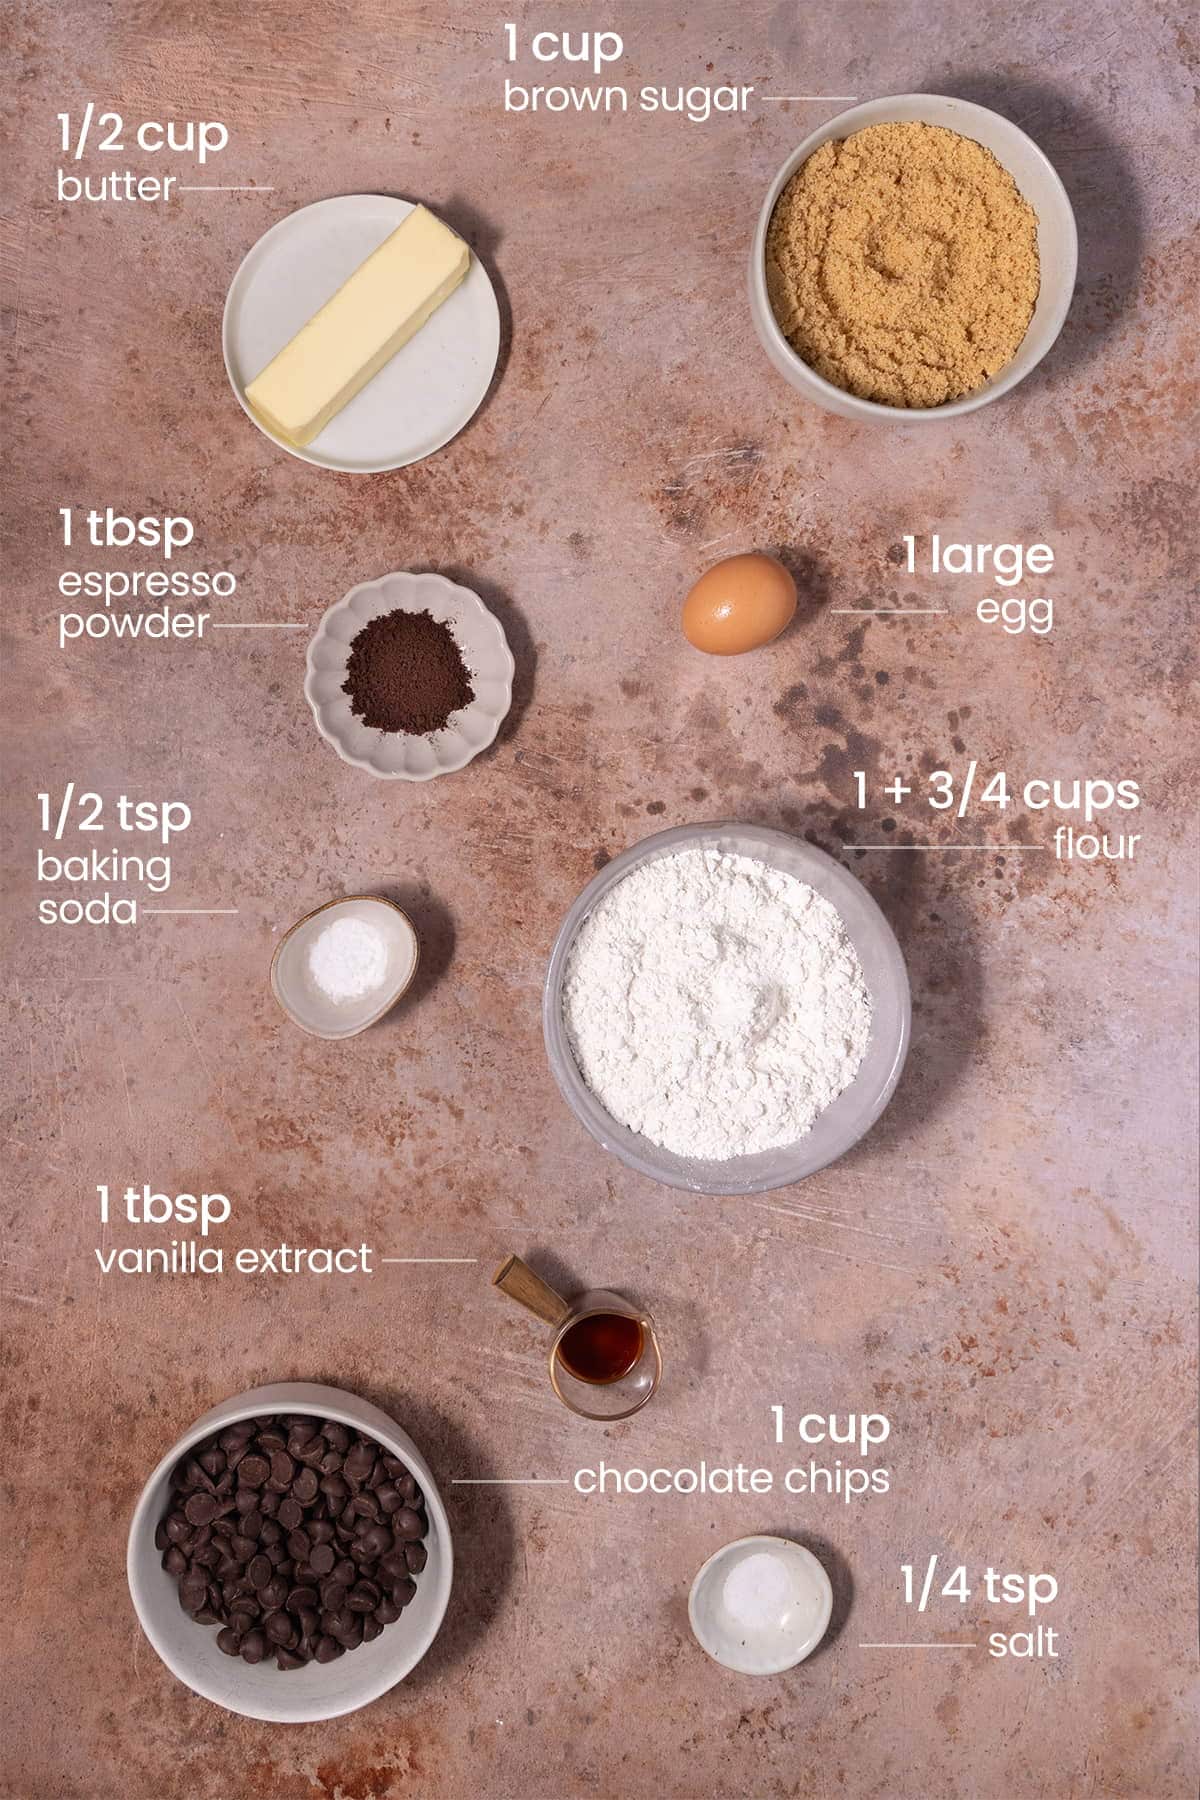 All ingredients needed for Chocolate Chip Coffee Cookies including unsalted butter, light brown sugar, espresso powder, egg, baking soda, all-purpose flour, vanilla extract, chocolate chips, and salt